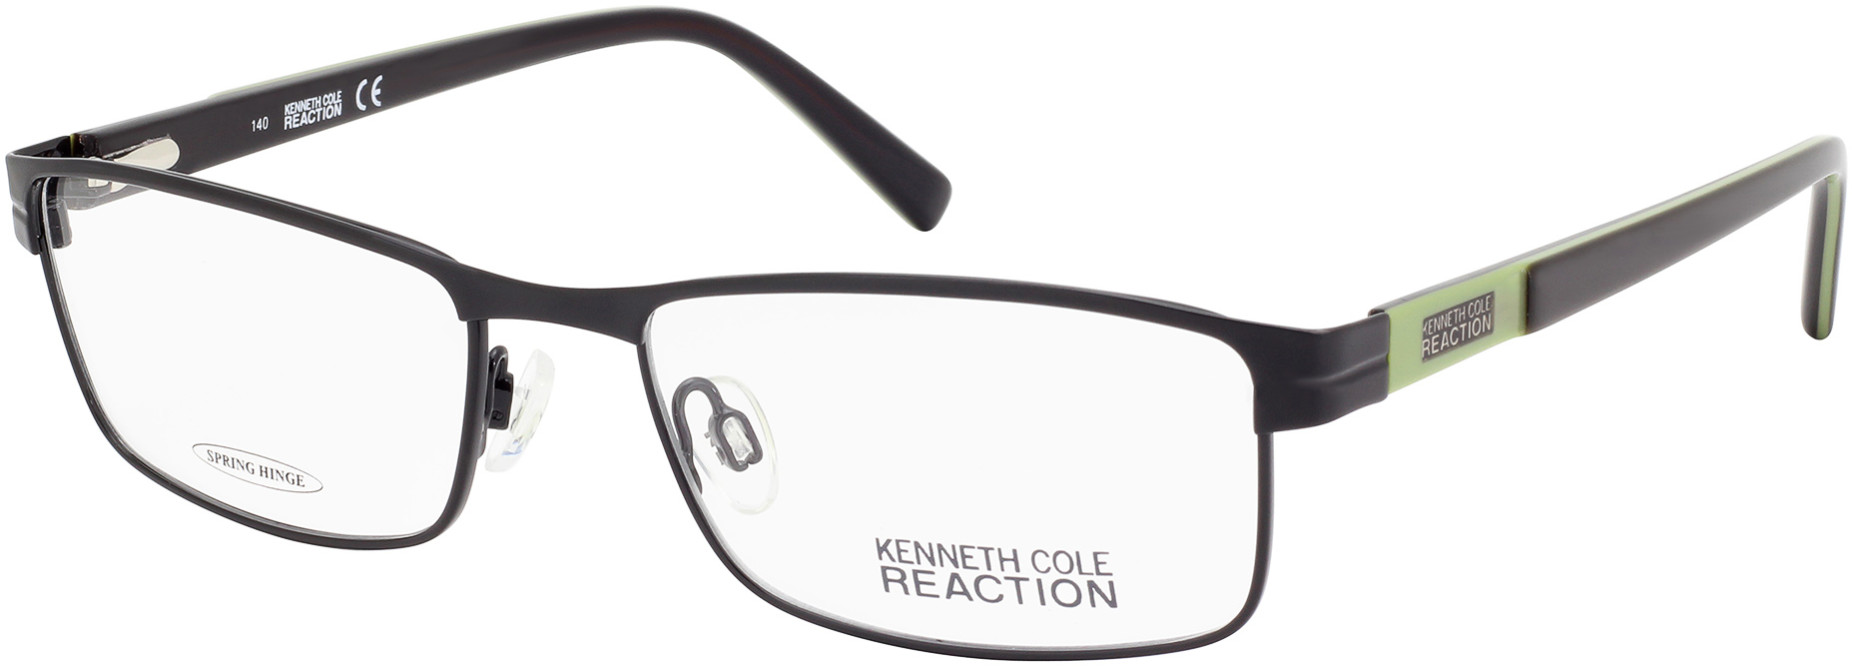 KENNETH COLE NY 0752